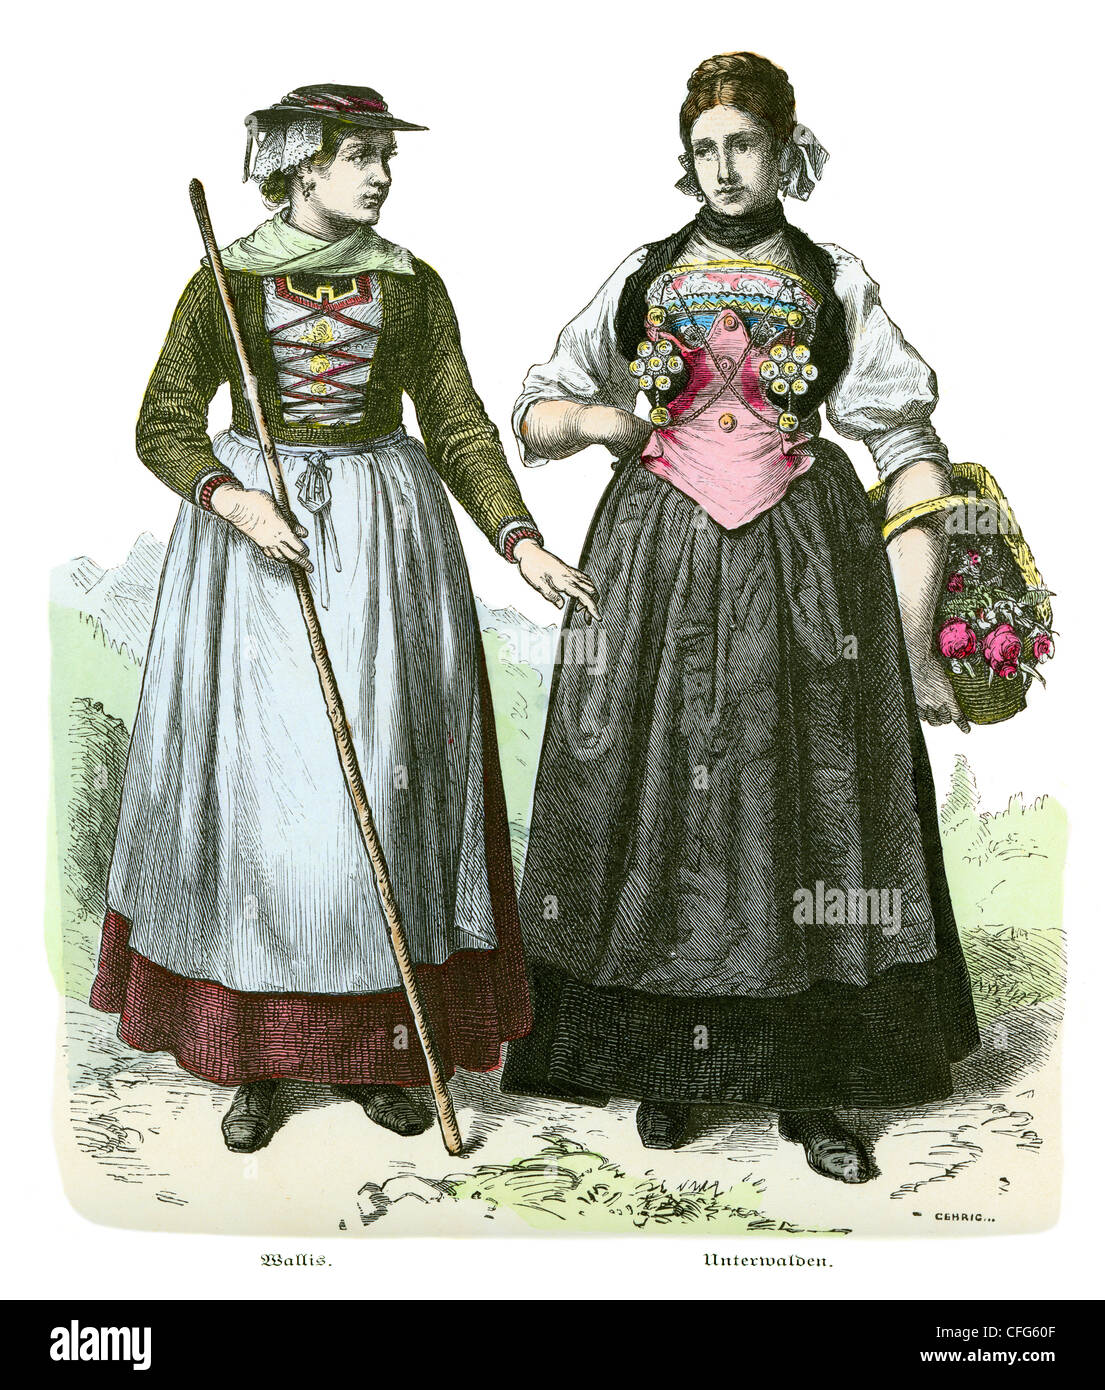 A couple of women in the traditional costume of Switzerland of the 19th Century. Wallis and Unterwalden. Stock Photo